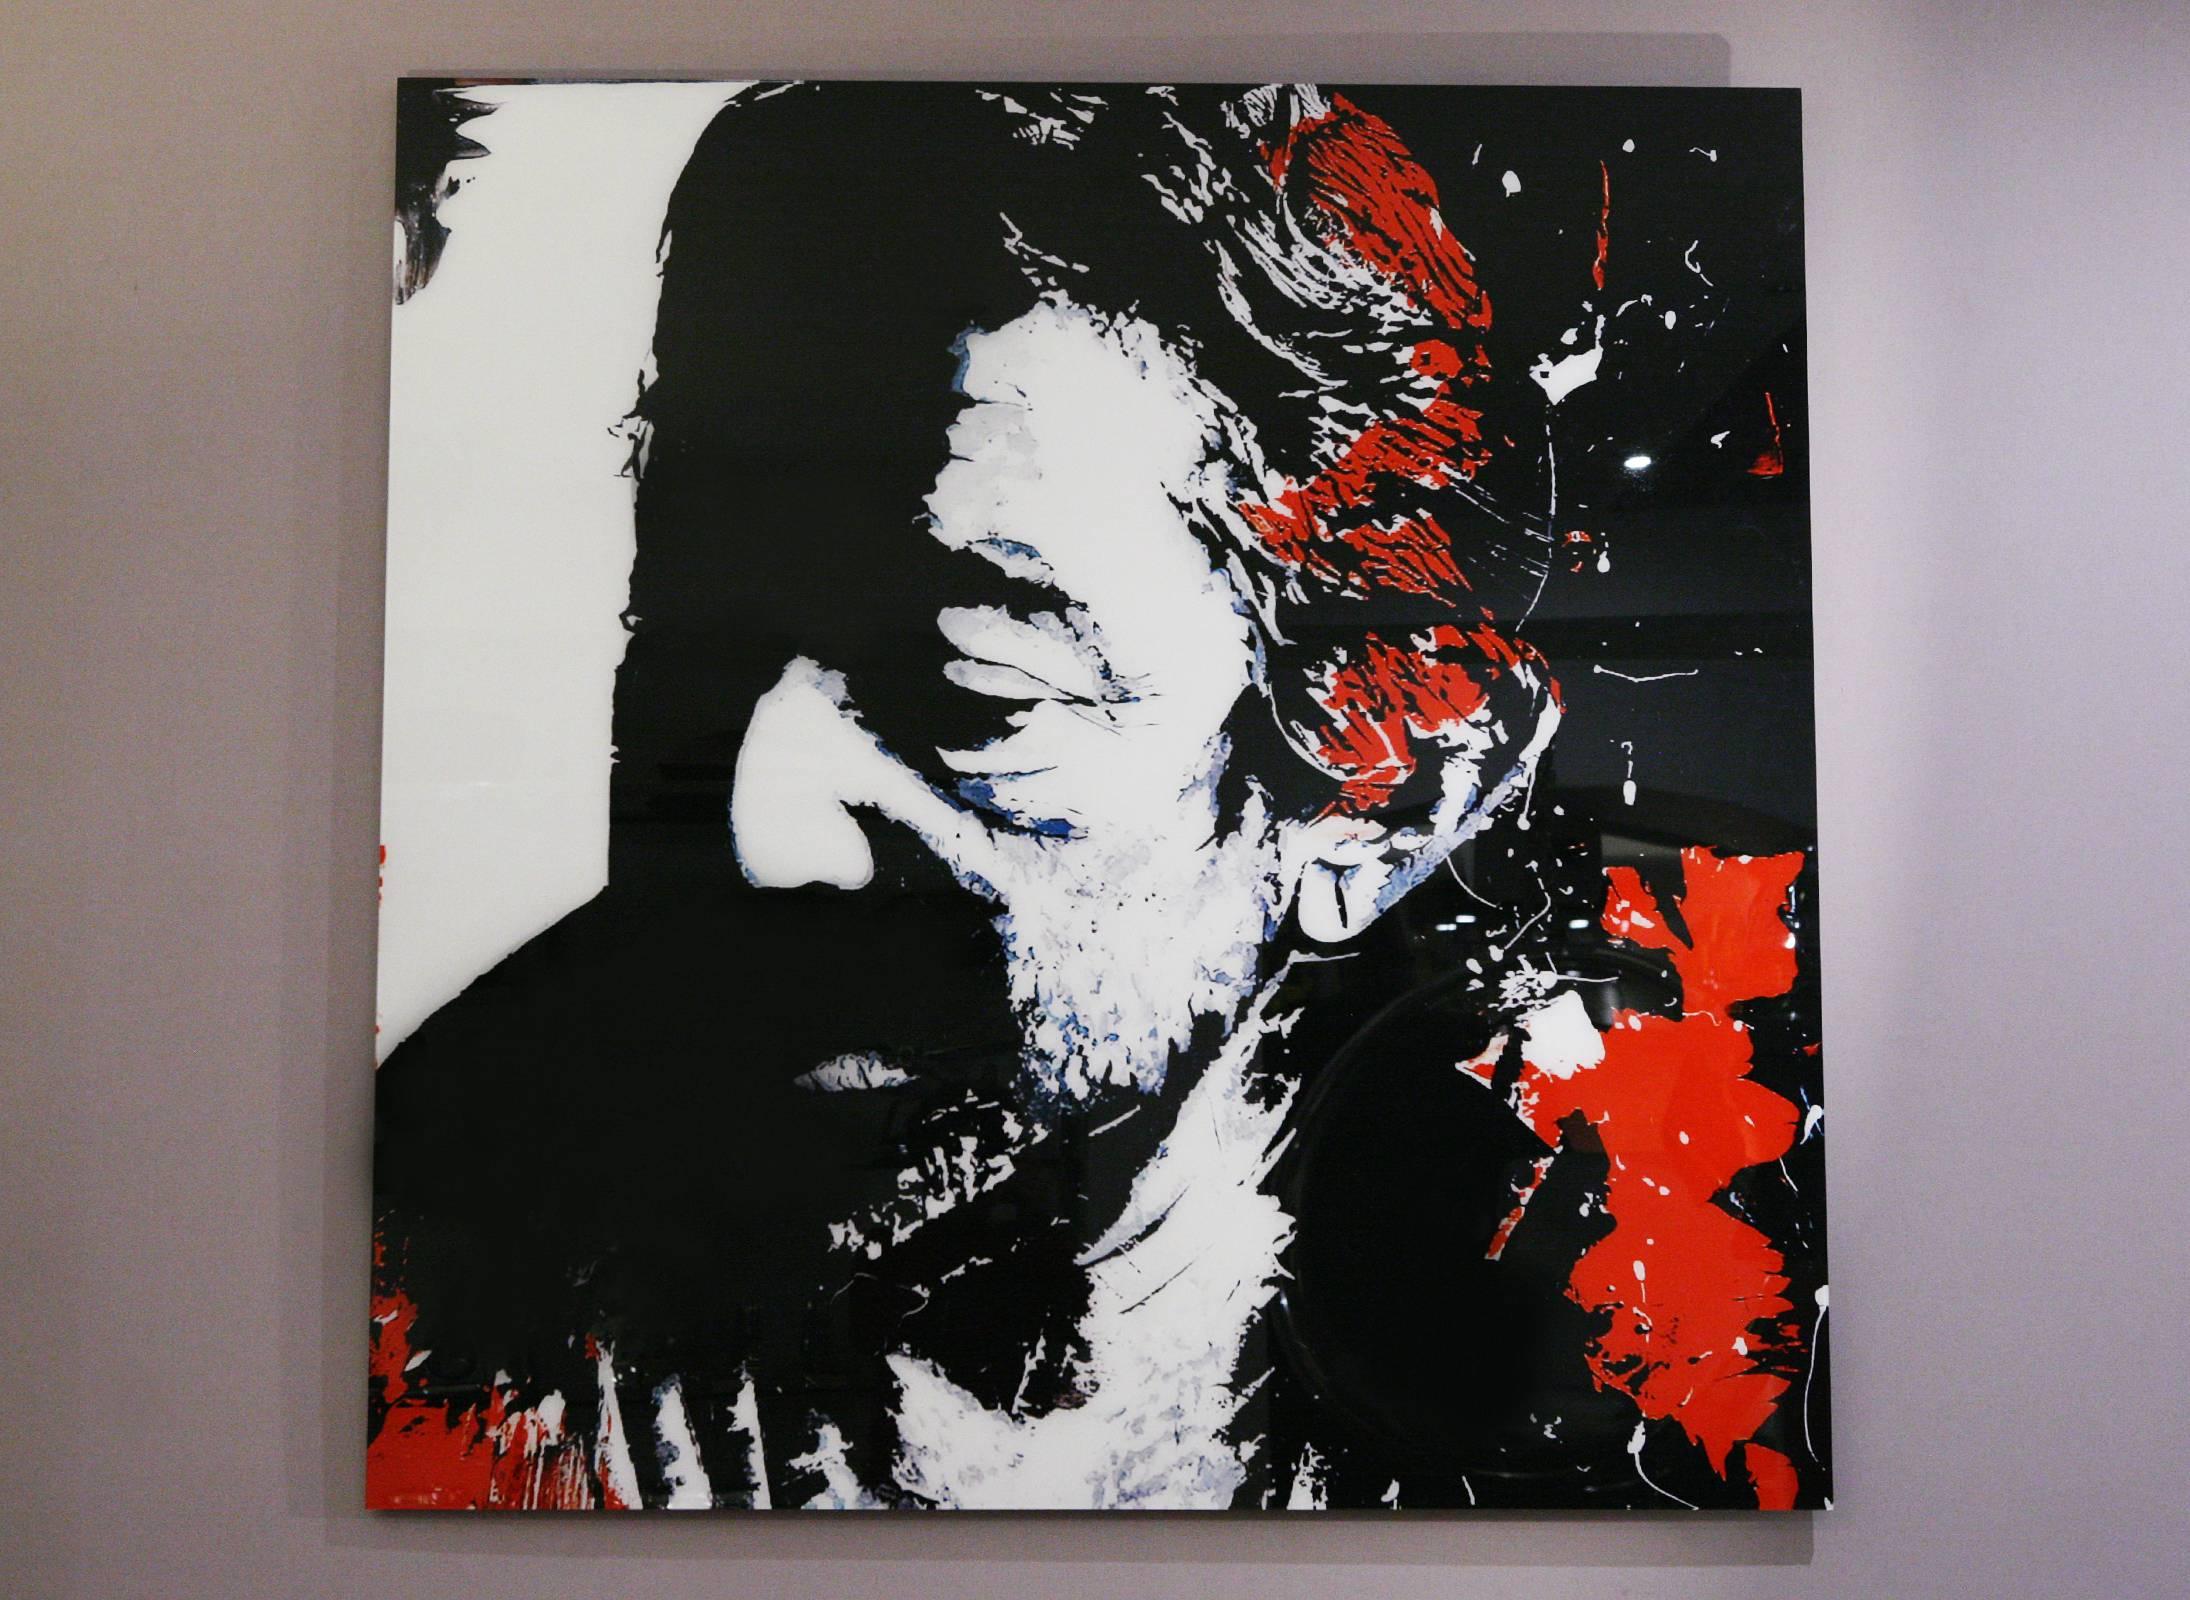 Photography Serge Gainsbourg on plexiglass.
Limited Edition of six pieces. Made by Valerie 
Durand artist. Delivered with certificate.
